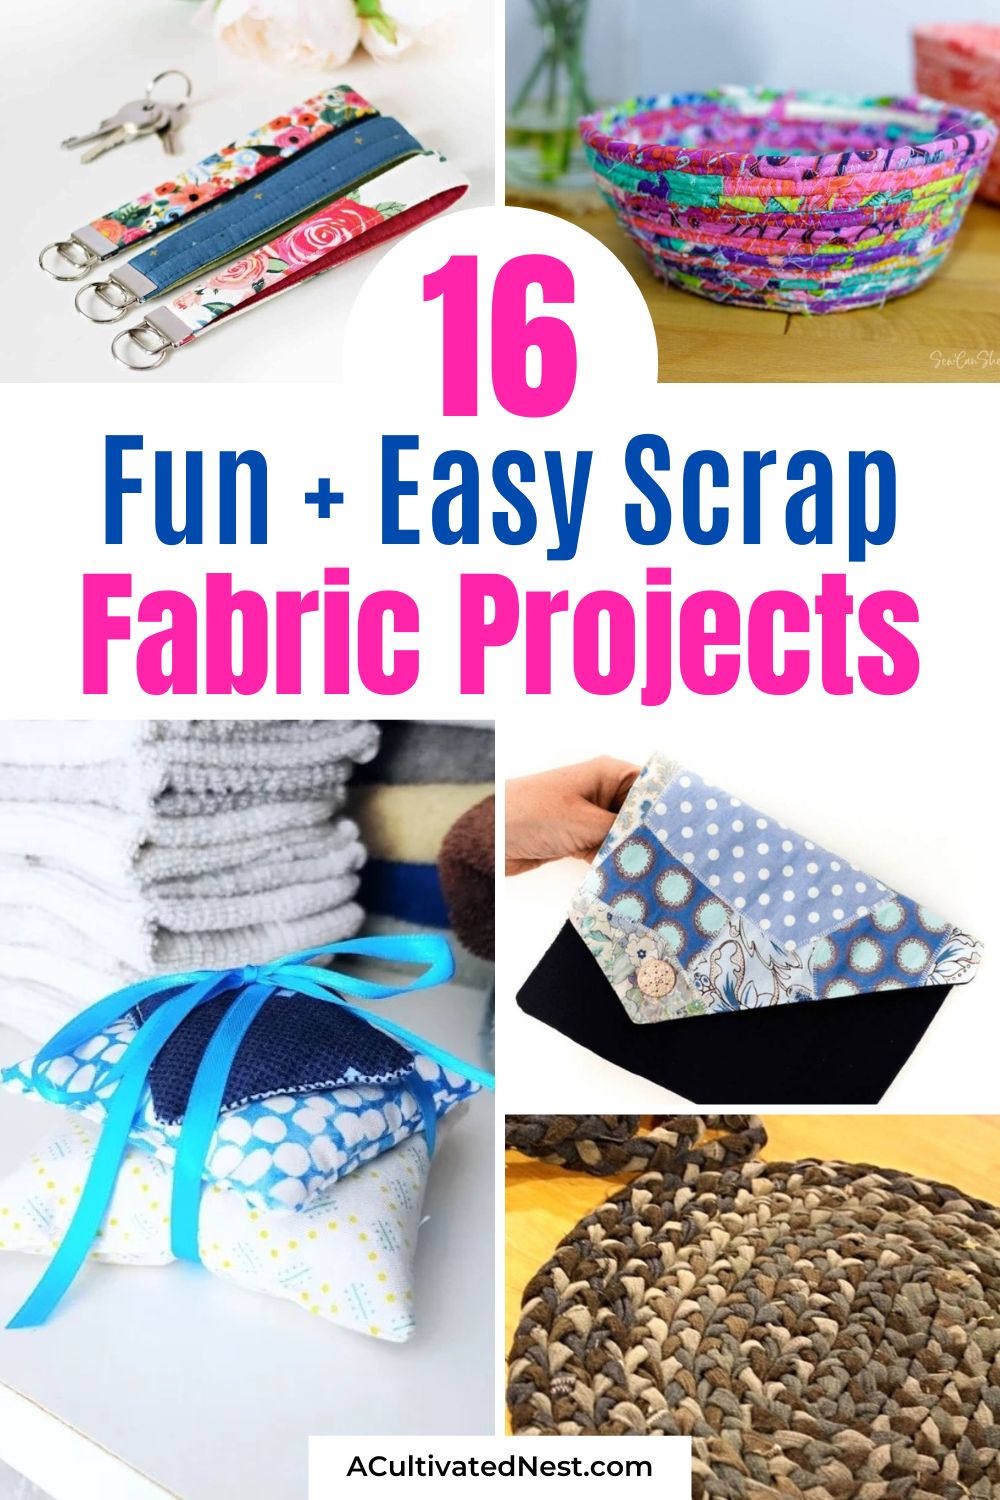 16 Easy and Free Fabric Scrap Projects- Transform your fabric scraps into fabulous finds! Discover fun and frugal fabric scrap projects that make the most of your leftover materials. Whether you're a seasoned sewer or a beginner, these easy ideas offer endless possibilities. | #crafts #easySewing #fabricScrapProjects #beginnerSewing #ACultivatedNest